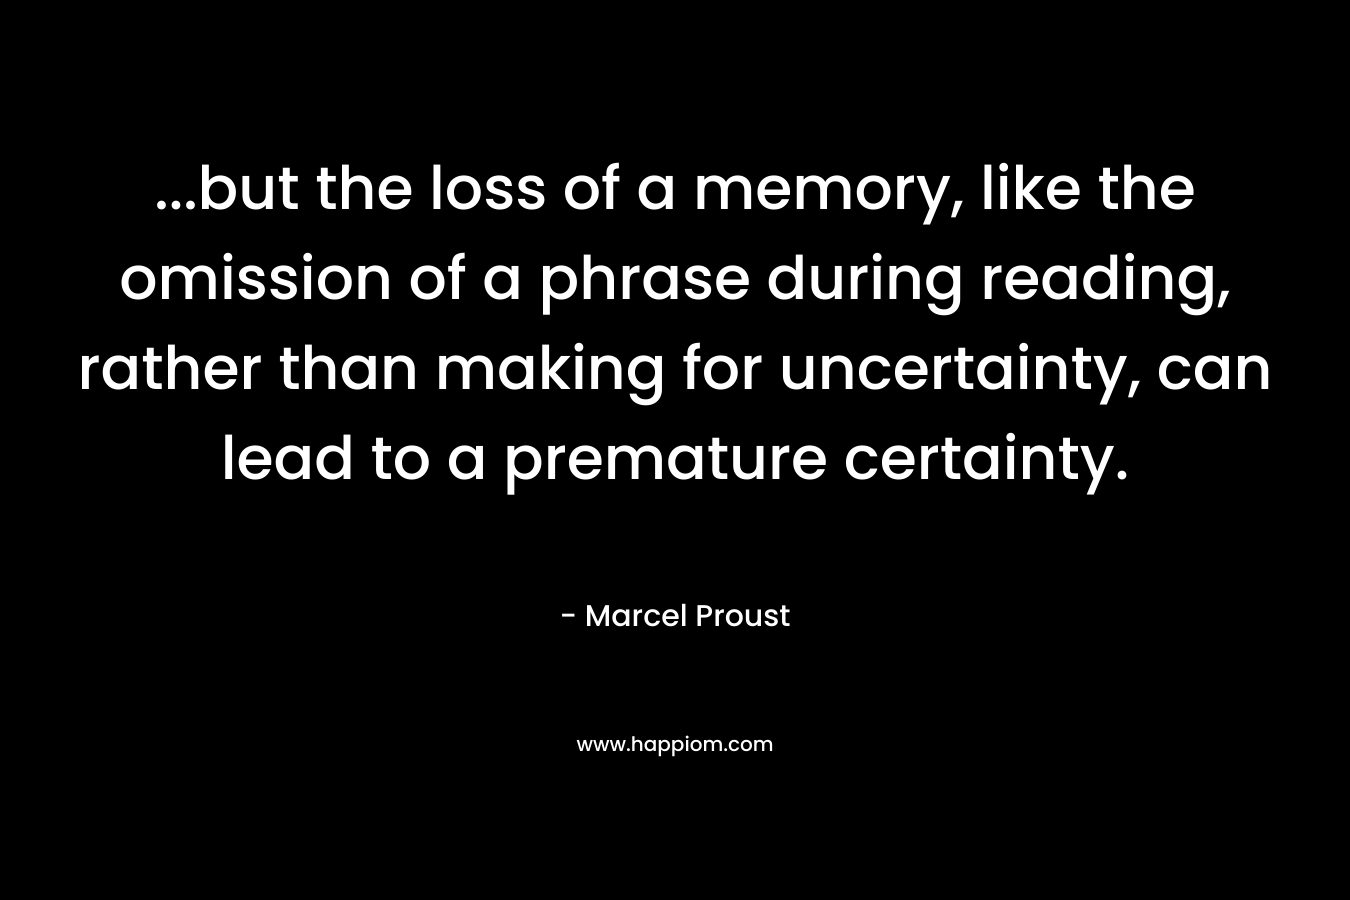 ...but the loss of a memory, like the omission of a phrase during reading, rather than making for uncertainty, can lead to a premature certainty.